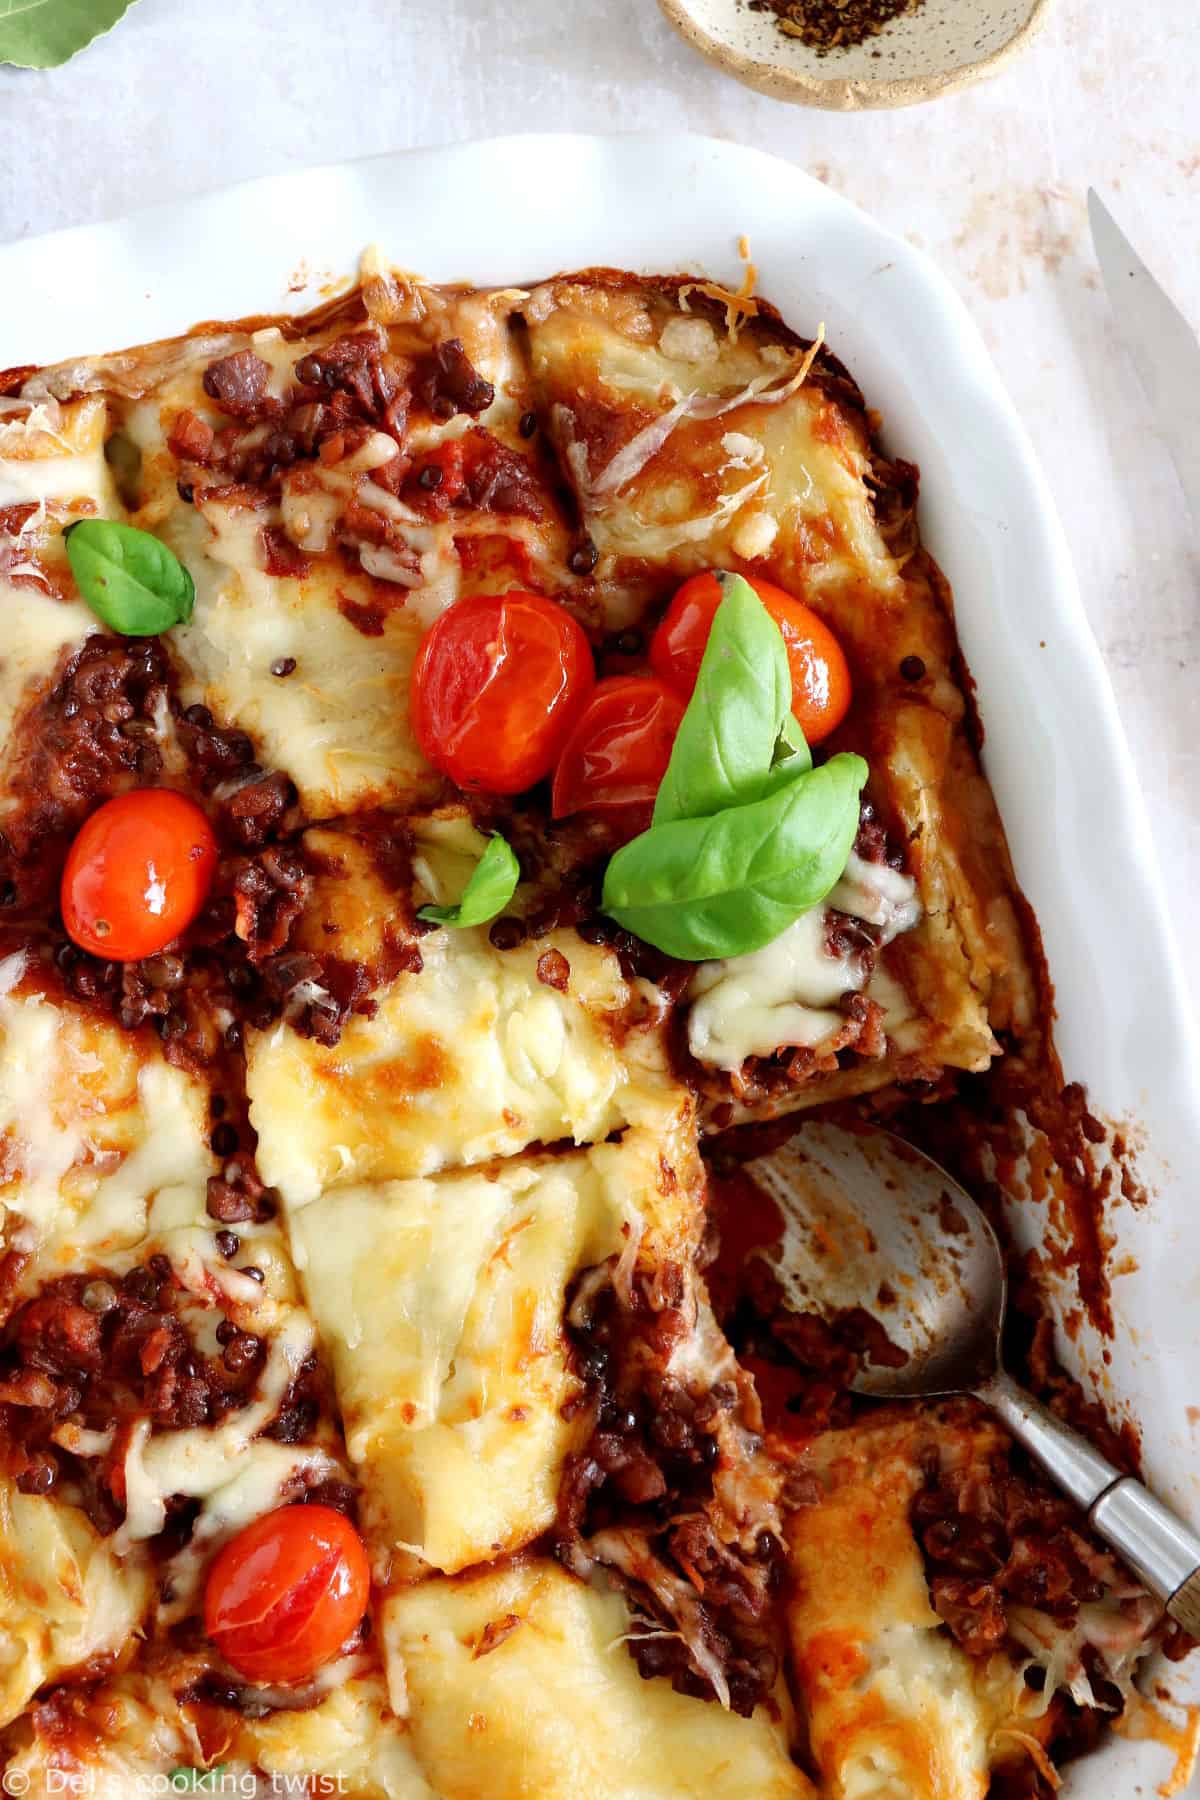 Vegetarian bolognese lasagna feature layers of slow-cooked lentil ragù, pasta sheets and creamy bechamel sauce, all baked to a golden-brown perfection.